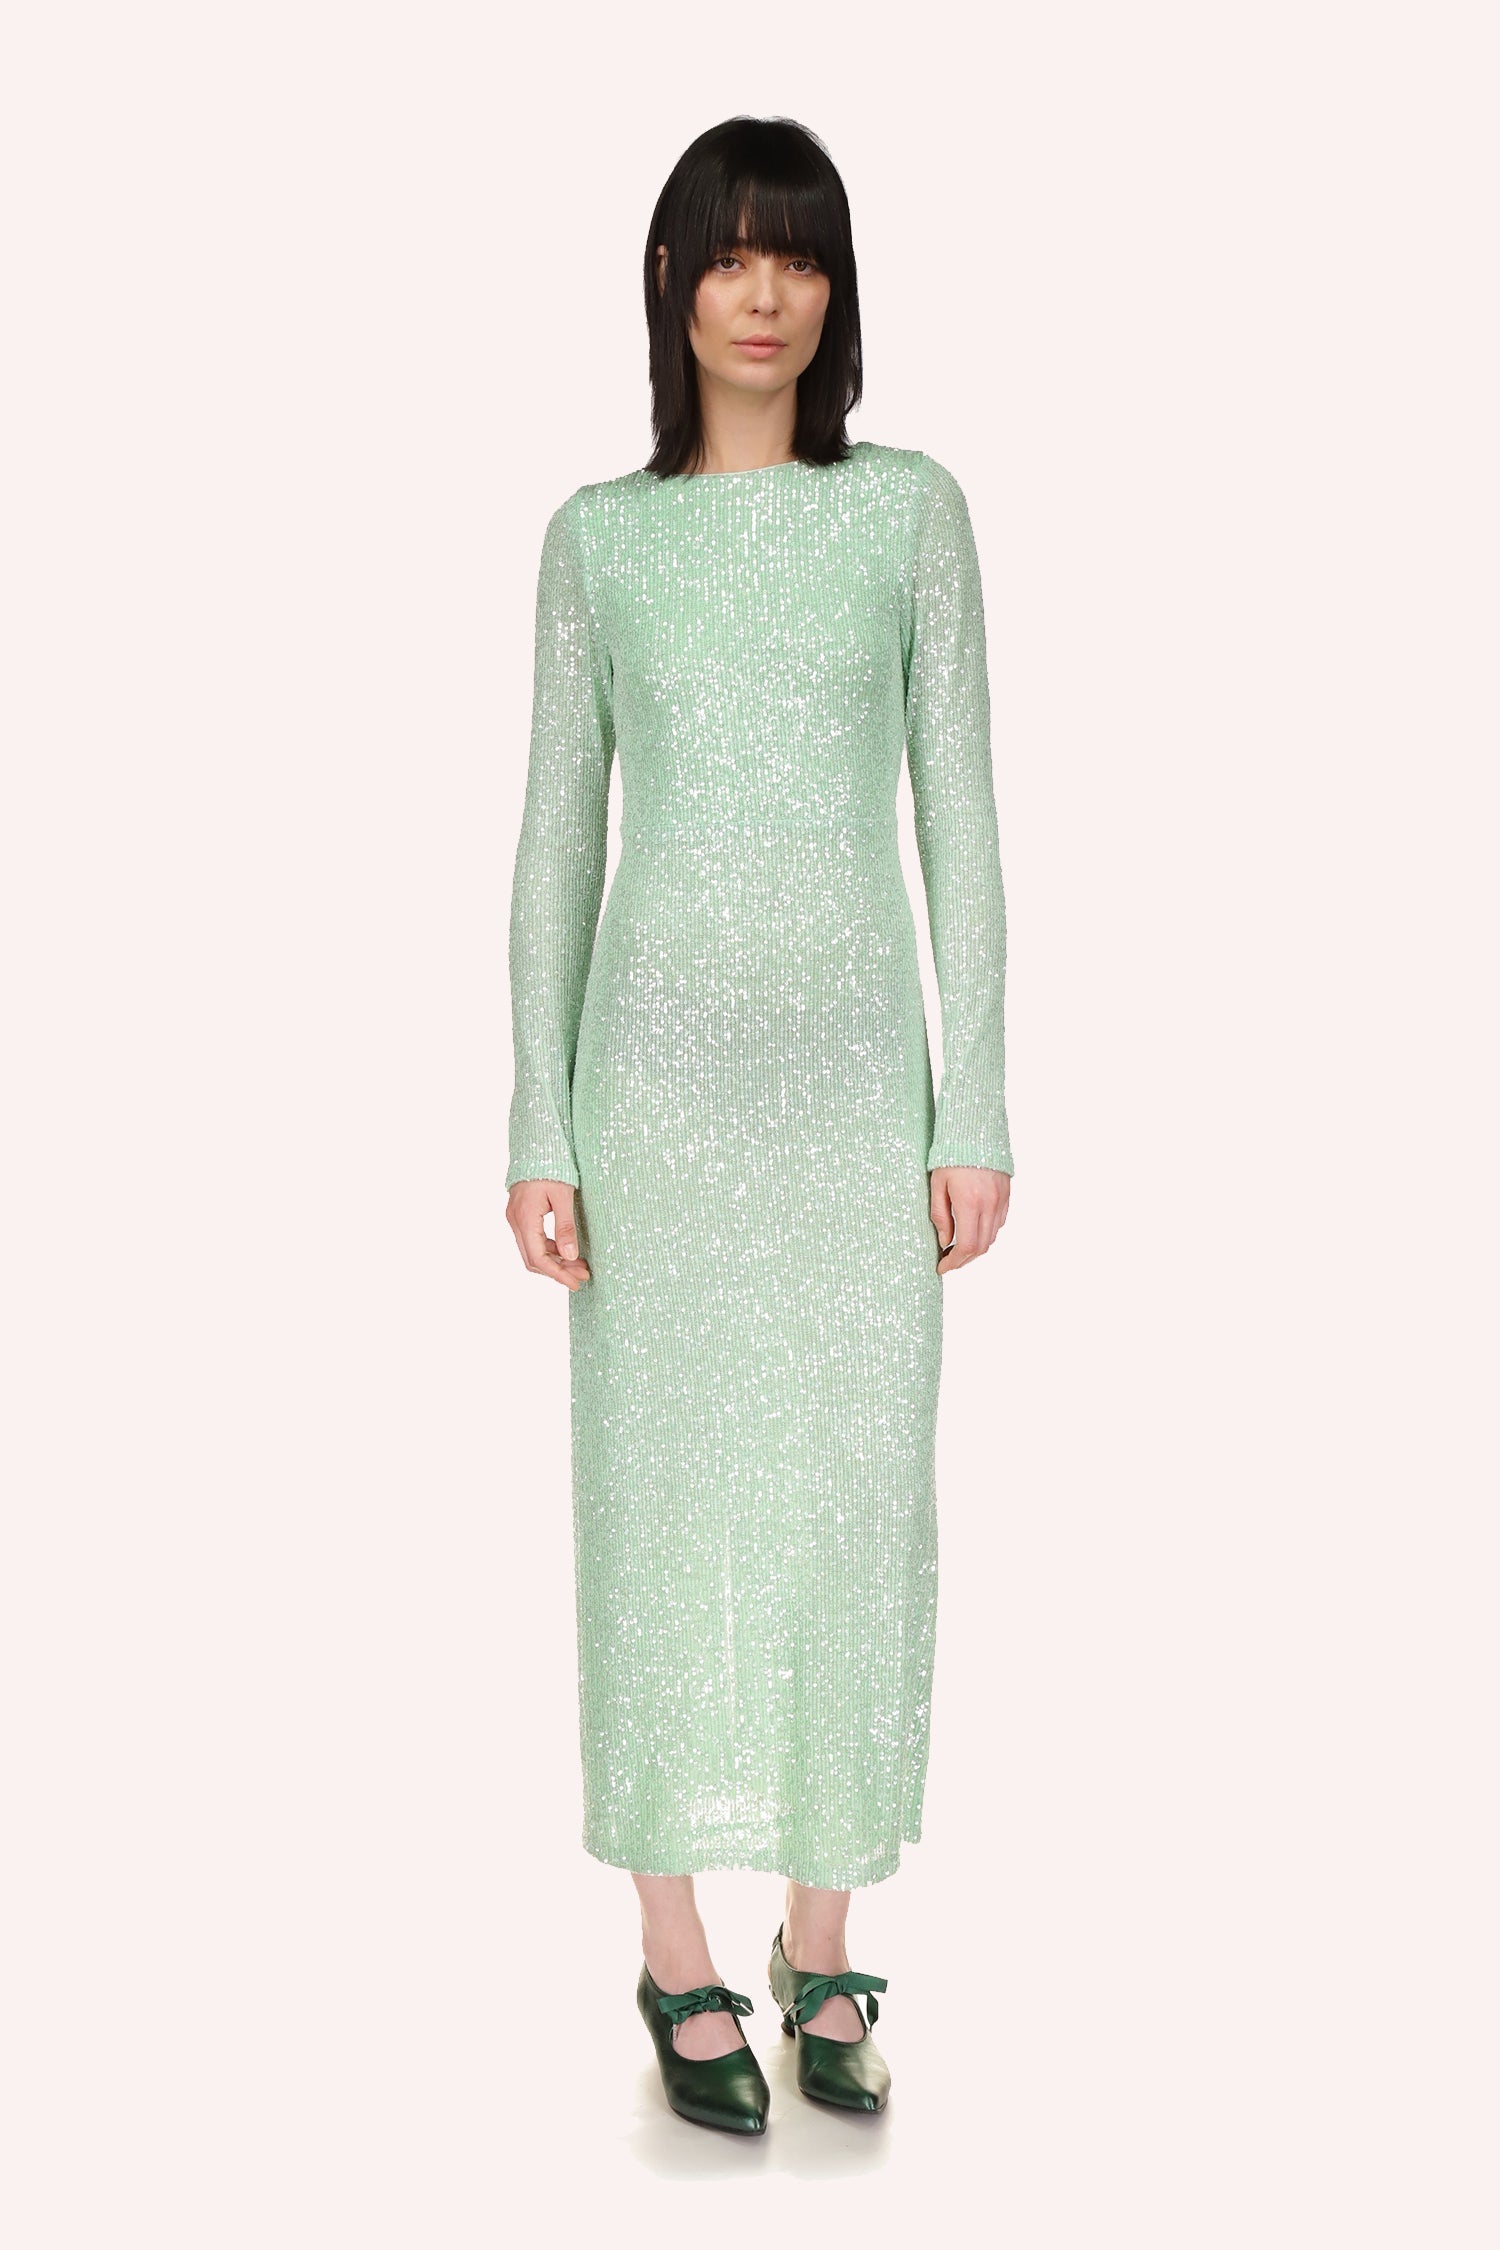 The Sequin Mesh Dress Peppermint, designed by Anna Sui, is a sophisticated gown 